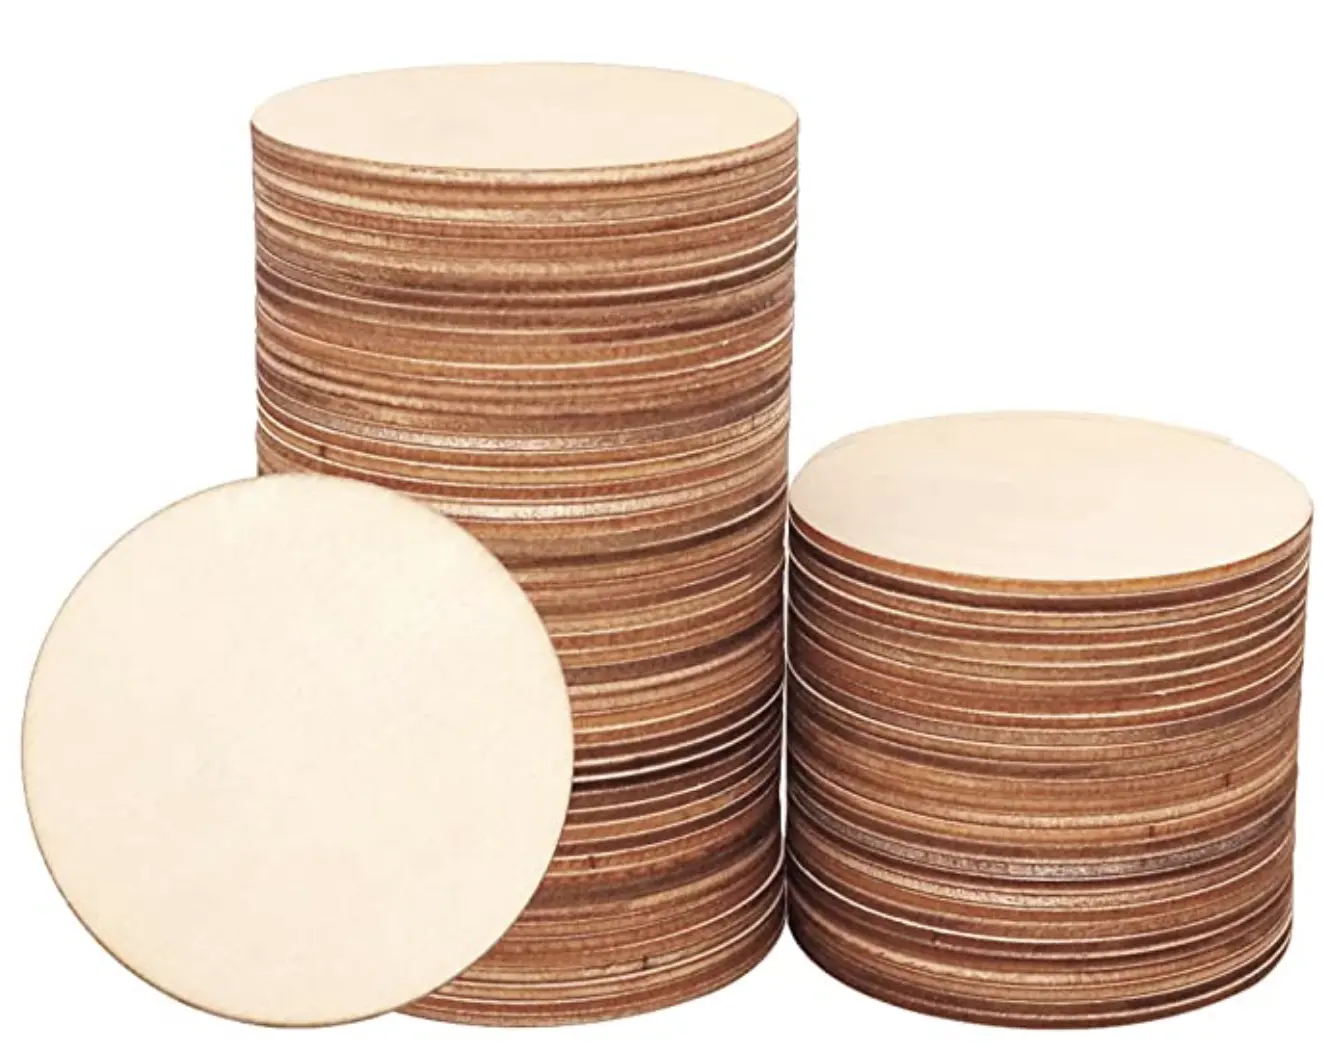 Wholesale DIY Unfinished Wood Circle 3 Inch Wooden hanger Circles Blank Wood Slices for Crafts